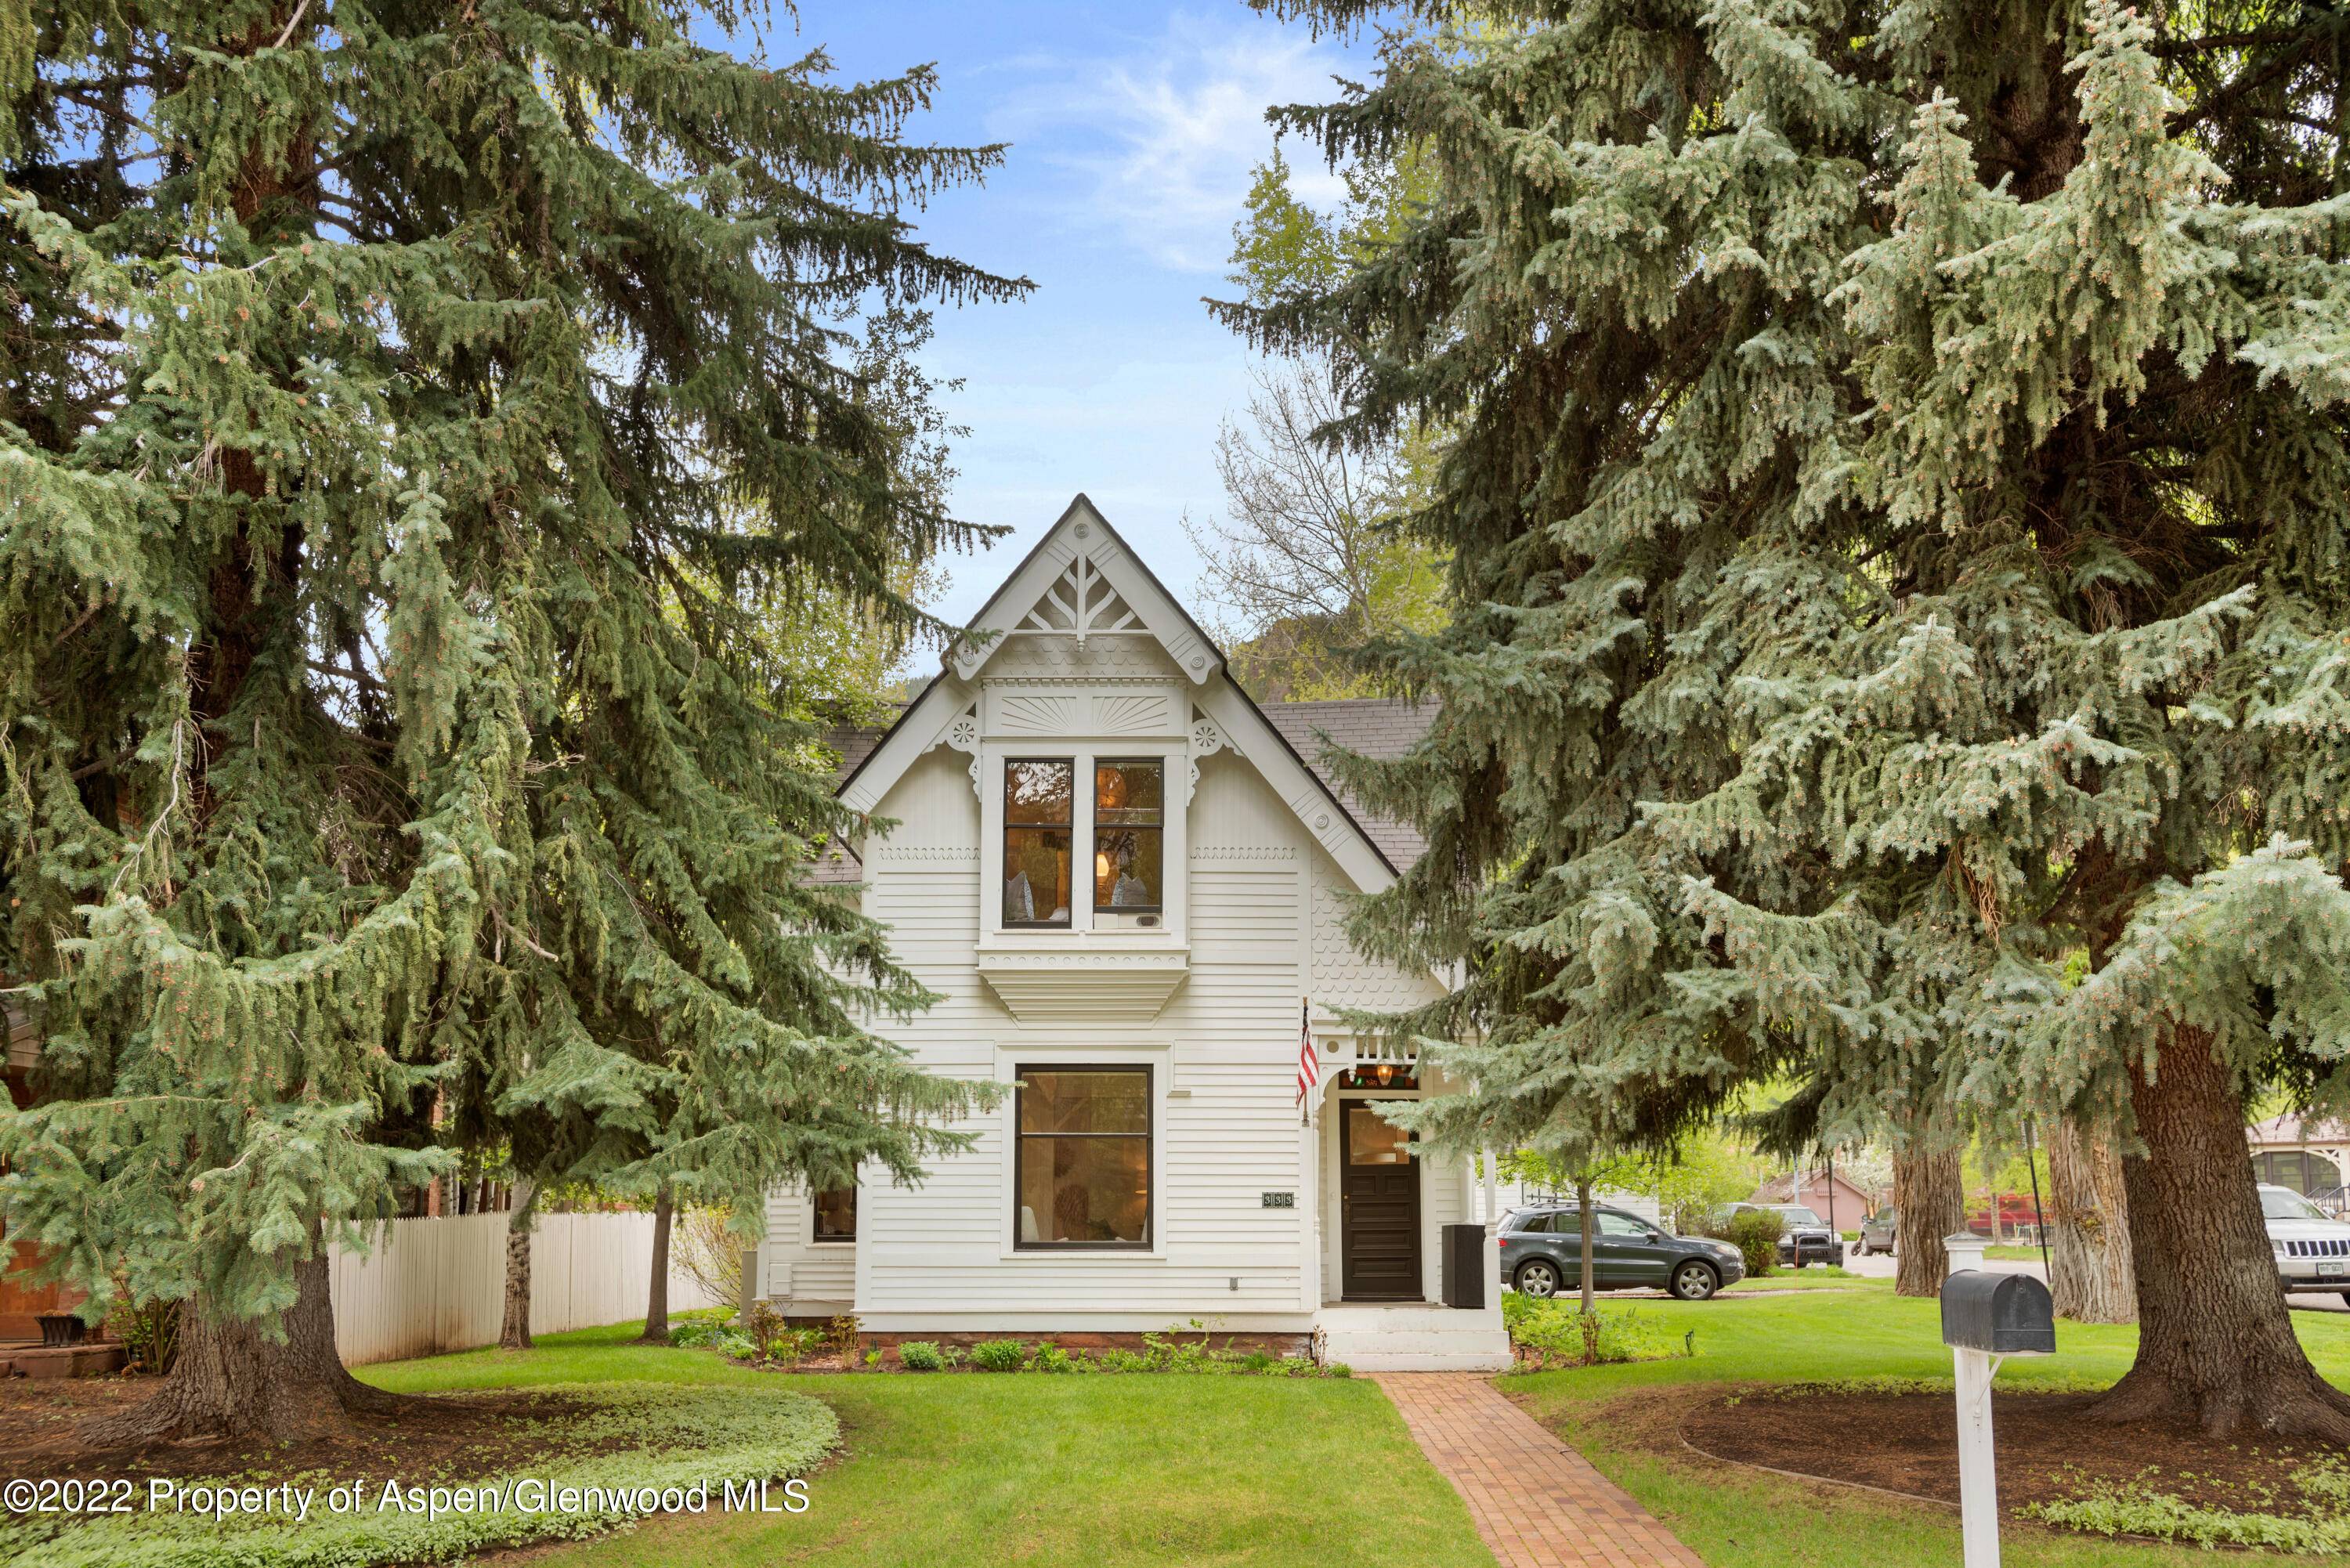 Now available for Summer Fall 2022, this charming West End Victorian with contemporary decor and updates throughout is the perfect home base to experience a season in Aspen.